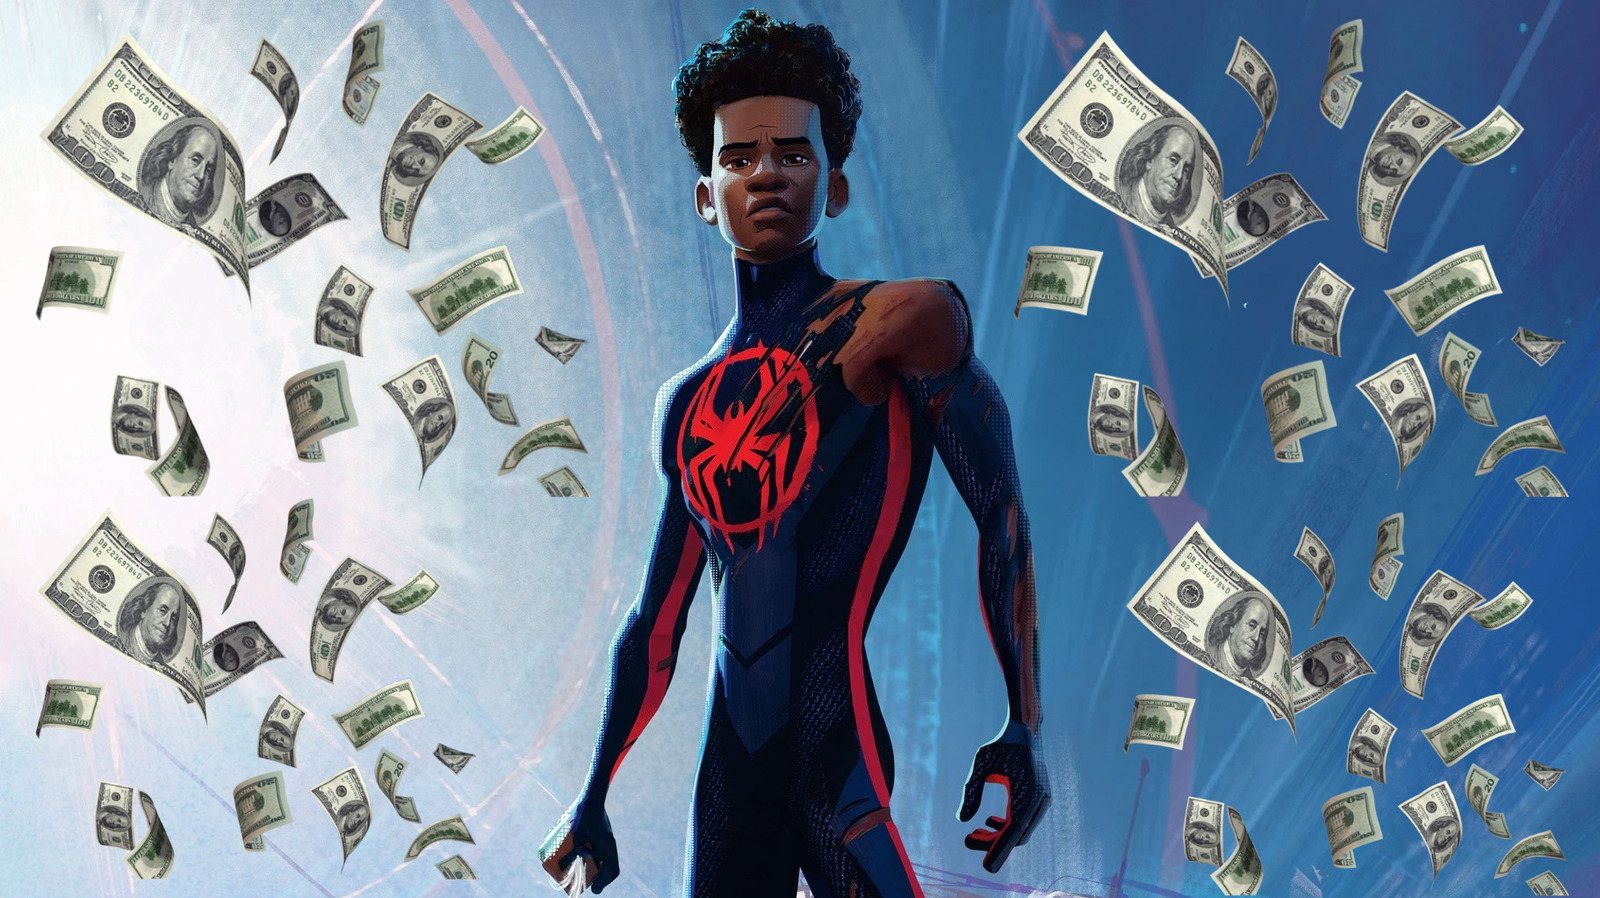 Videos] Spider Man: Across The Spider-Verse Is Number 1 At The Box Office